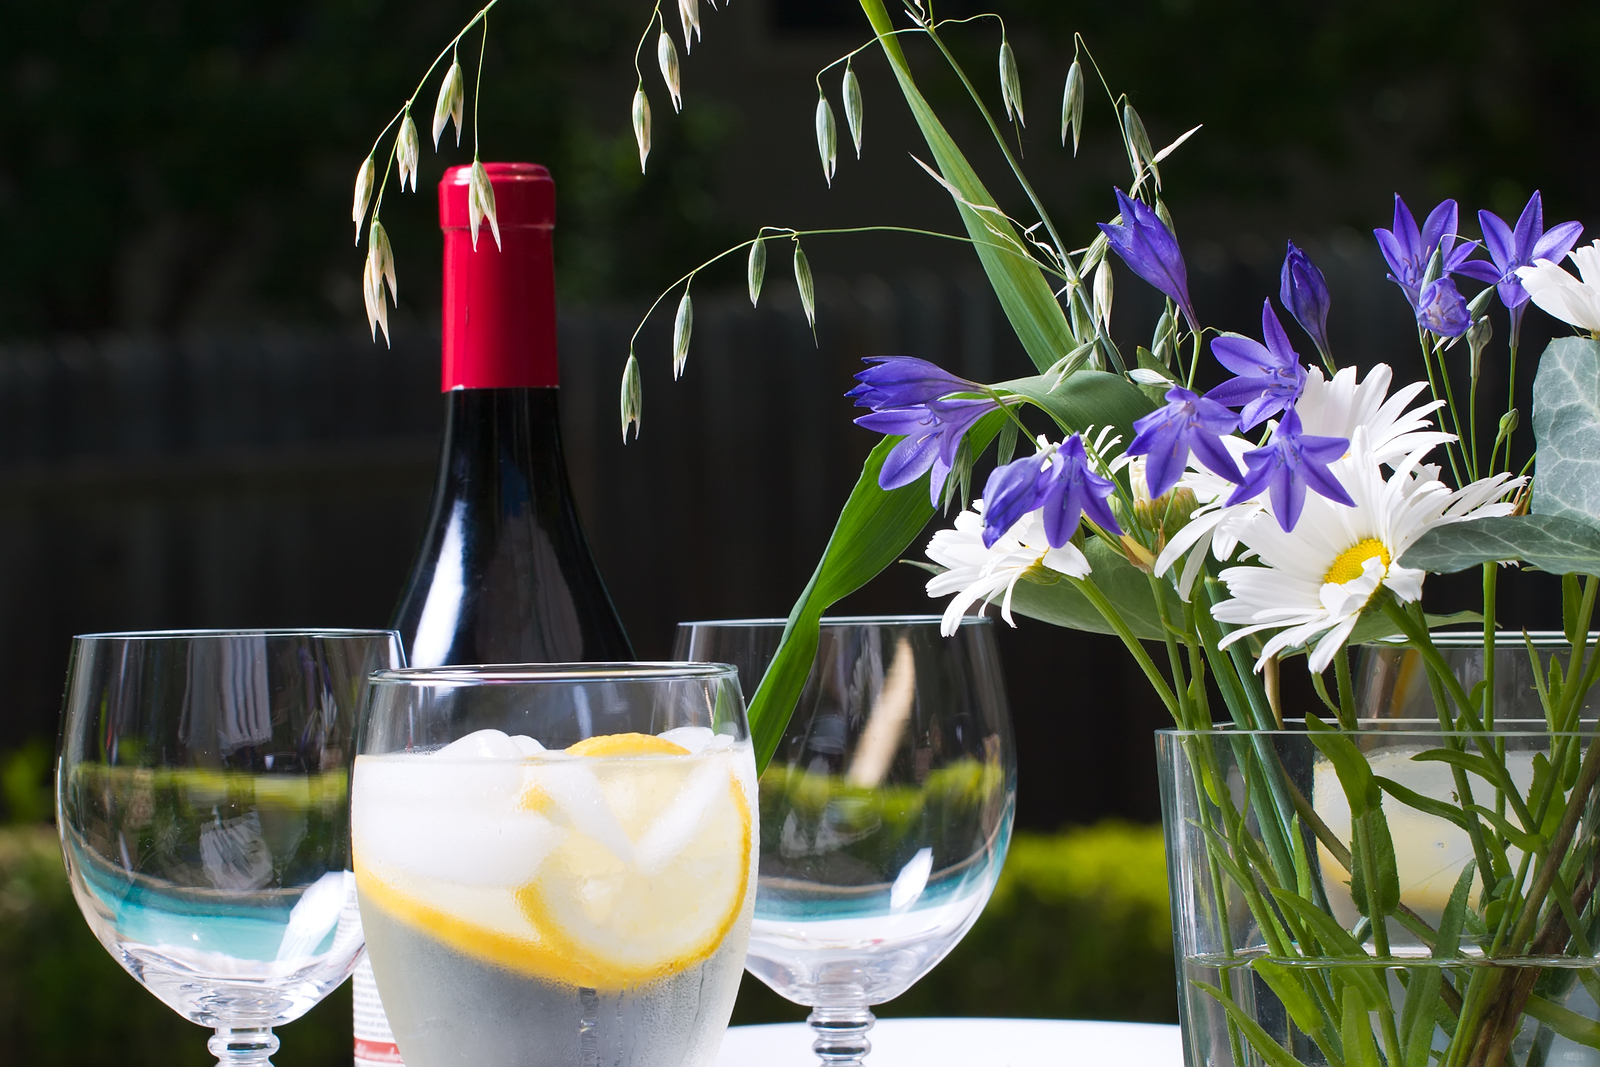 A romantic outdoor dinner with wine and flowers Wilcox Electric DC